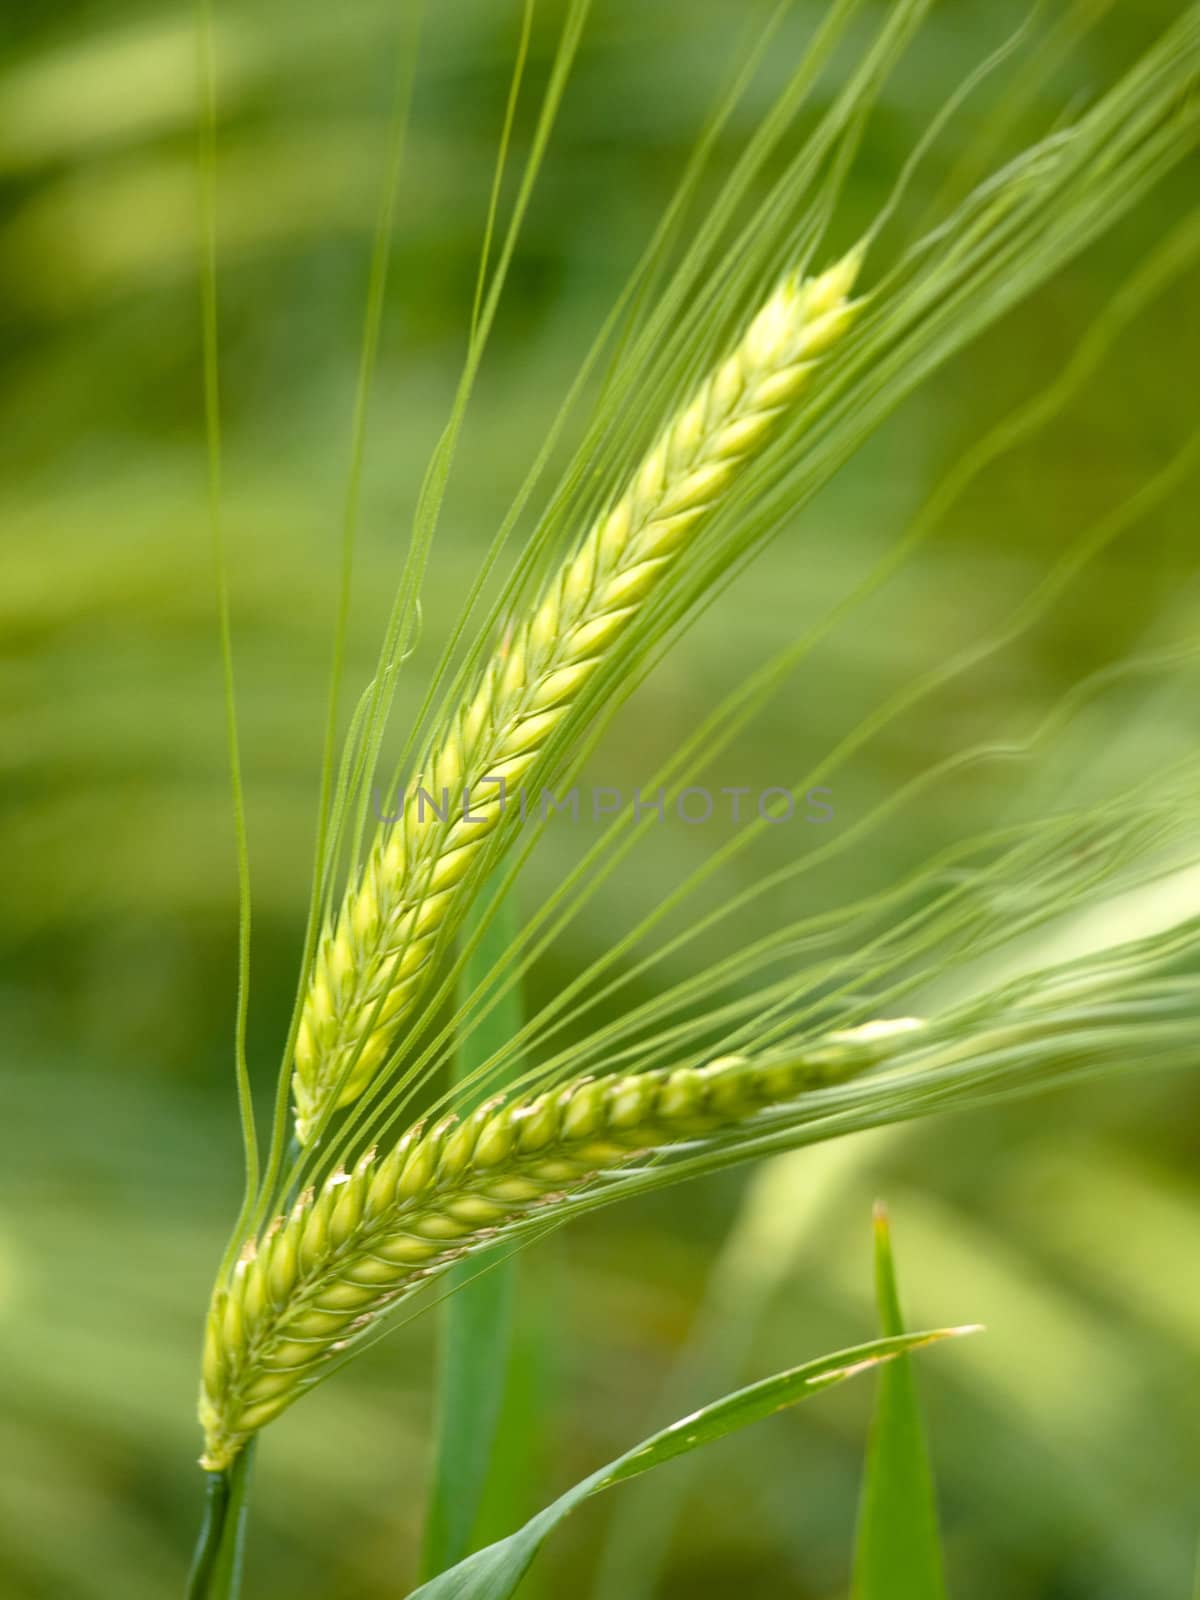 Green wheat close up at spring with shallow depth of field